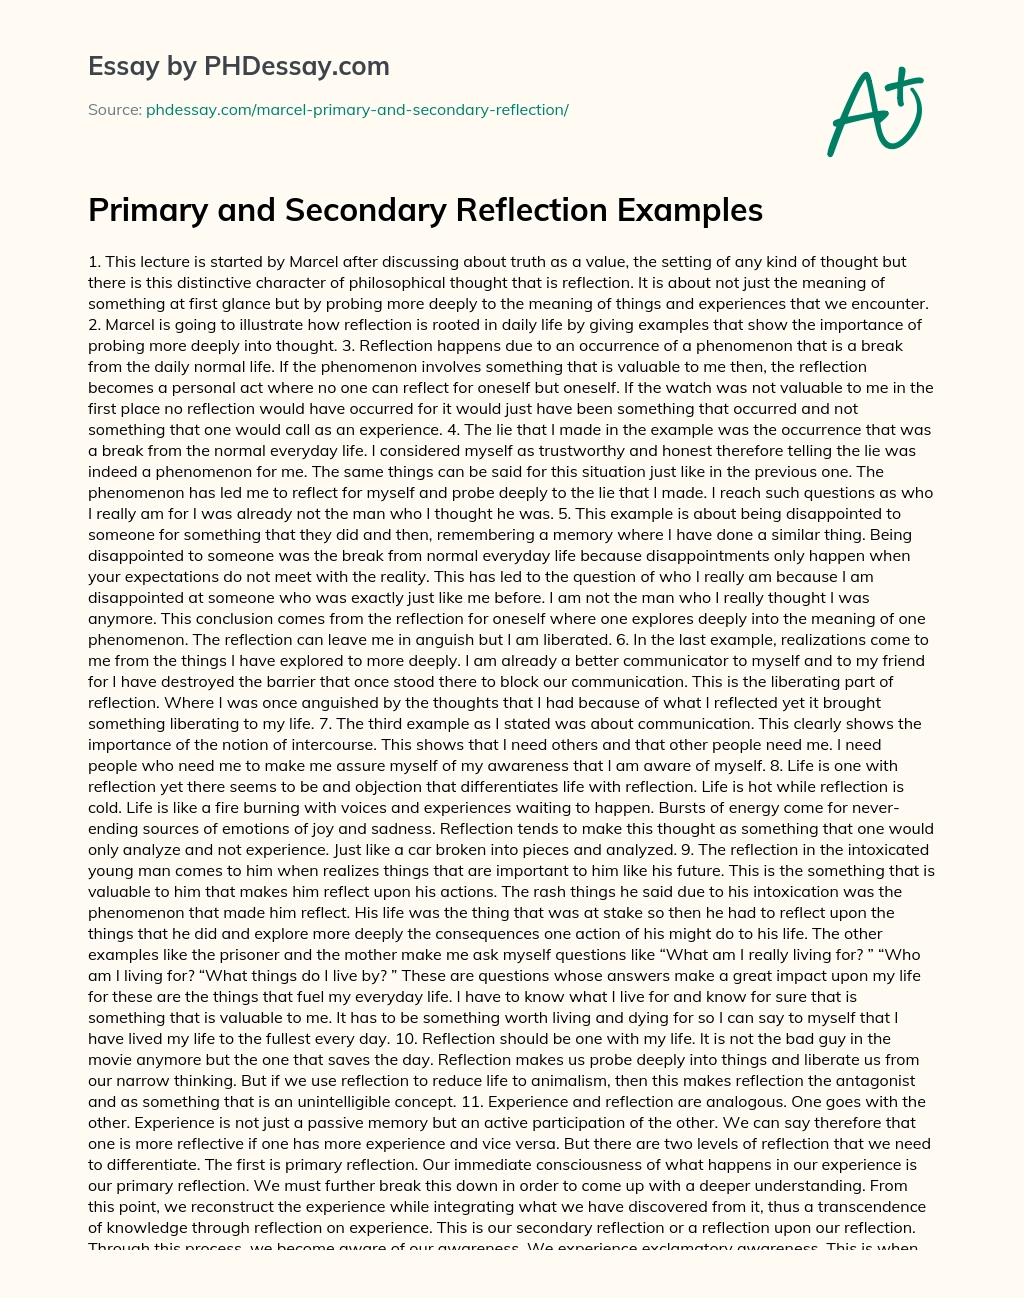 Primary and Secondary Reflection Examples essay